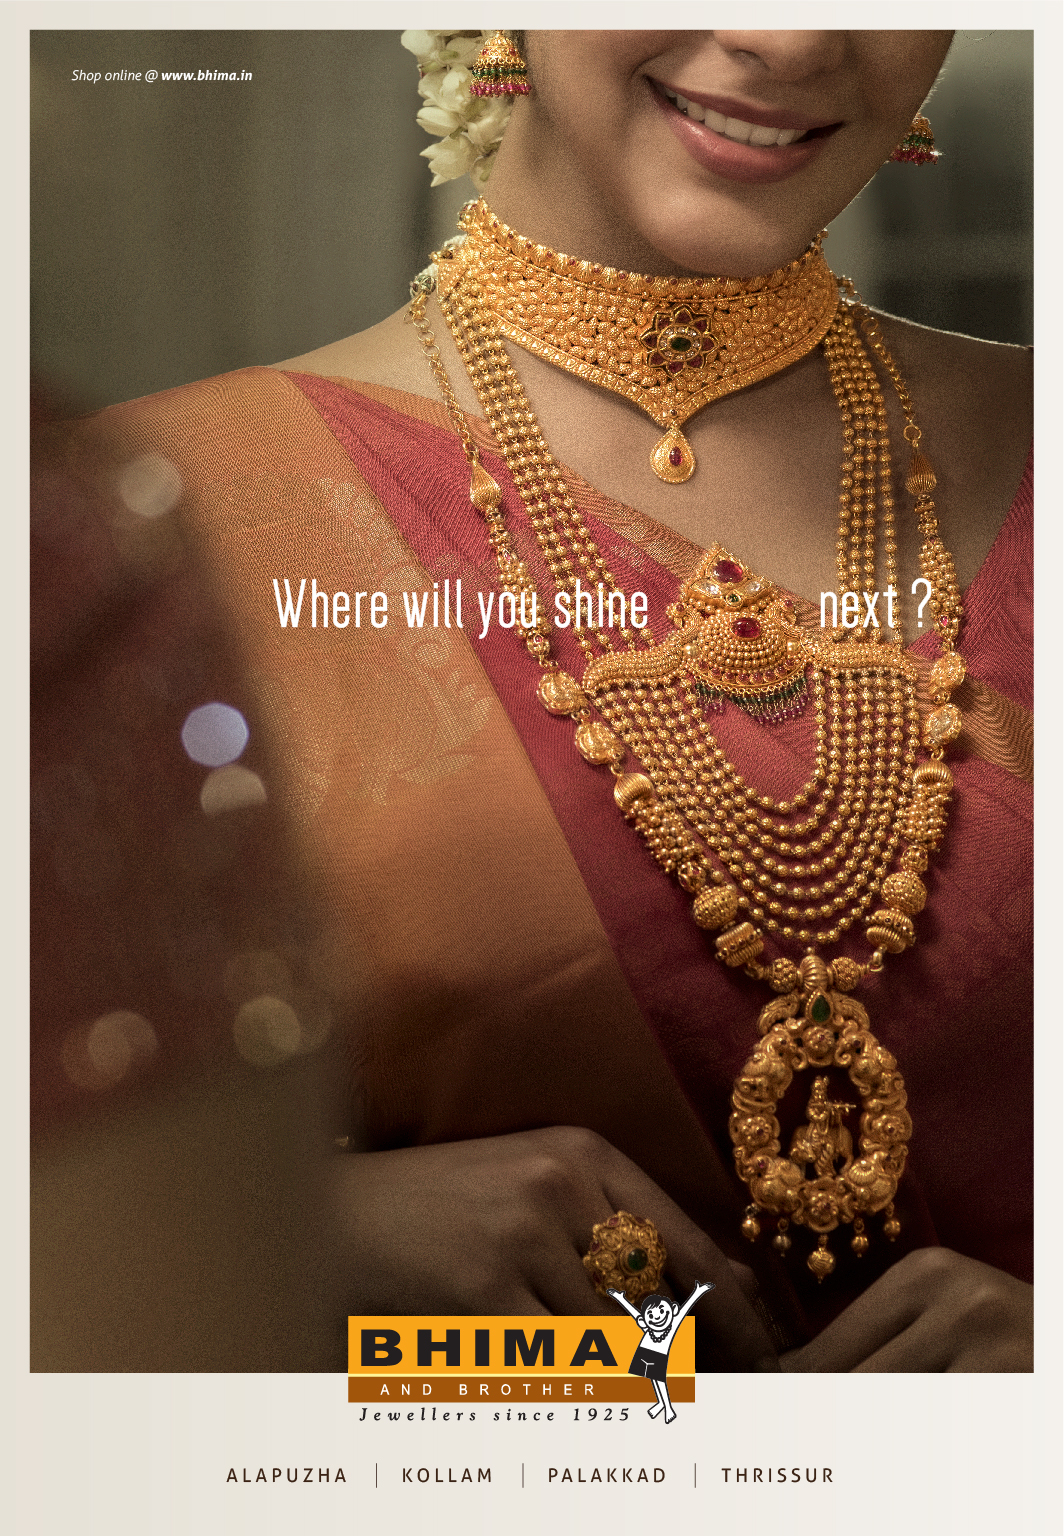 Where will you shine next by Bhima Jewellers | Print mock-up 6 by Stark Communications Pvt Ltd